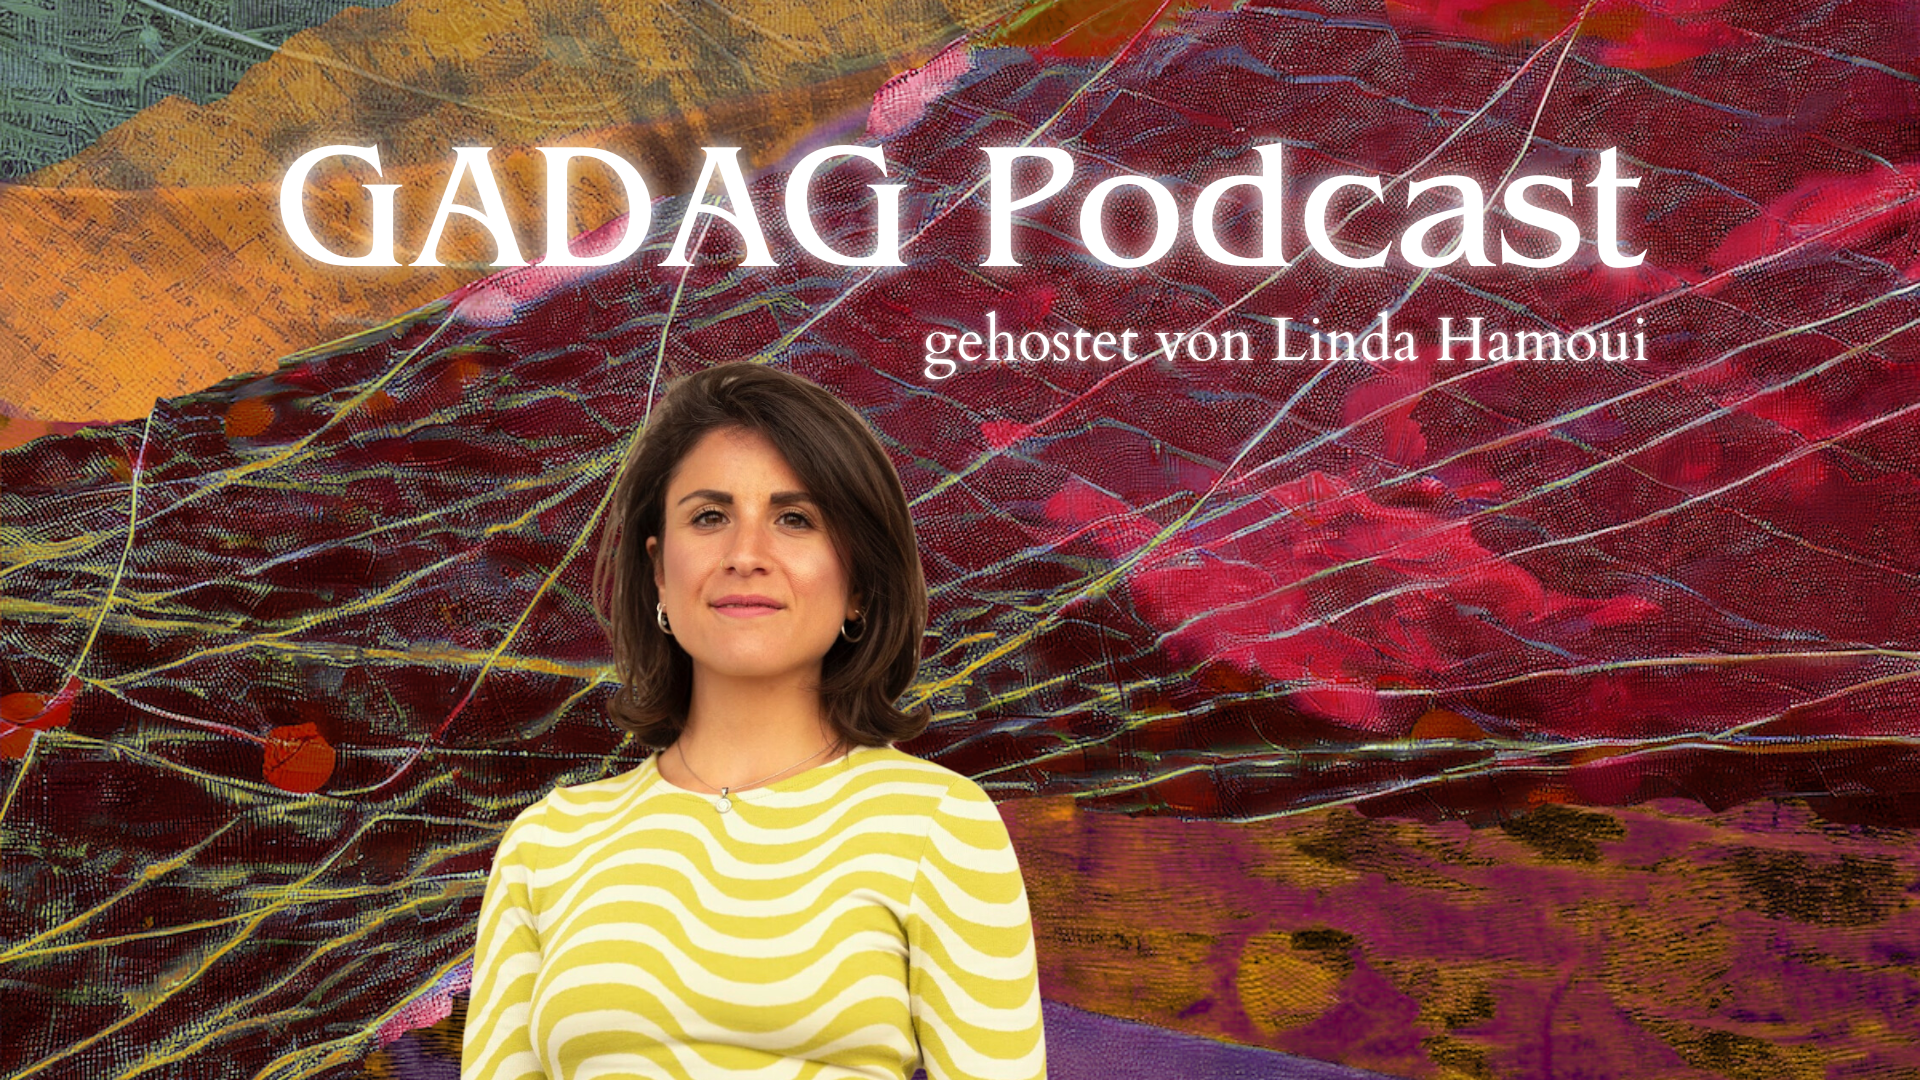 Alttext in German: A woman stands in front of a colorful, abstract background. She is wearing a yellow and white striped top. Next to the person is the text “GADAG Podcast, hosted by Linda Hamoui” in white letters. At the bottom of the picture is the logo "gعdun", which stands for Rethinking Culture. Alt text in English: A woman stands in front of a colorful, abstract background. She is wearing a yellow and white striped top. Next to the person is the text "GADAG Podcast, hosted by Linda Hamoui" in white letters.